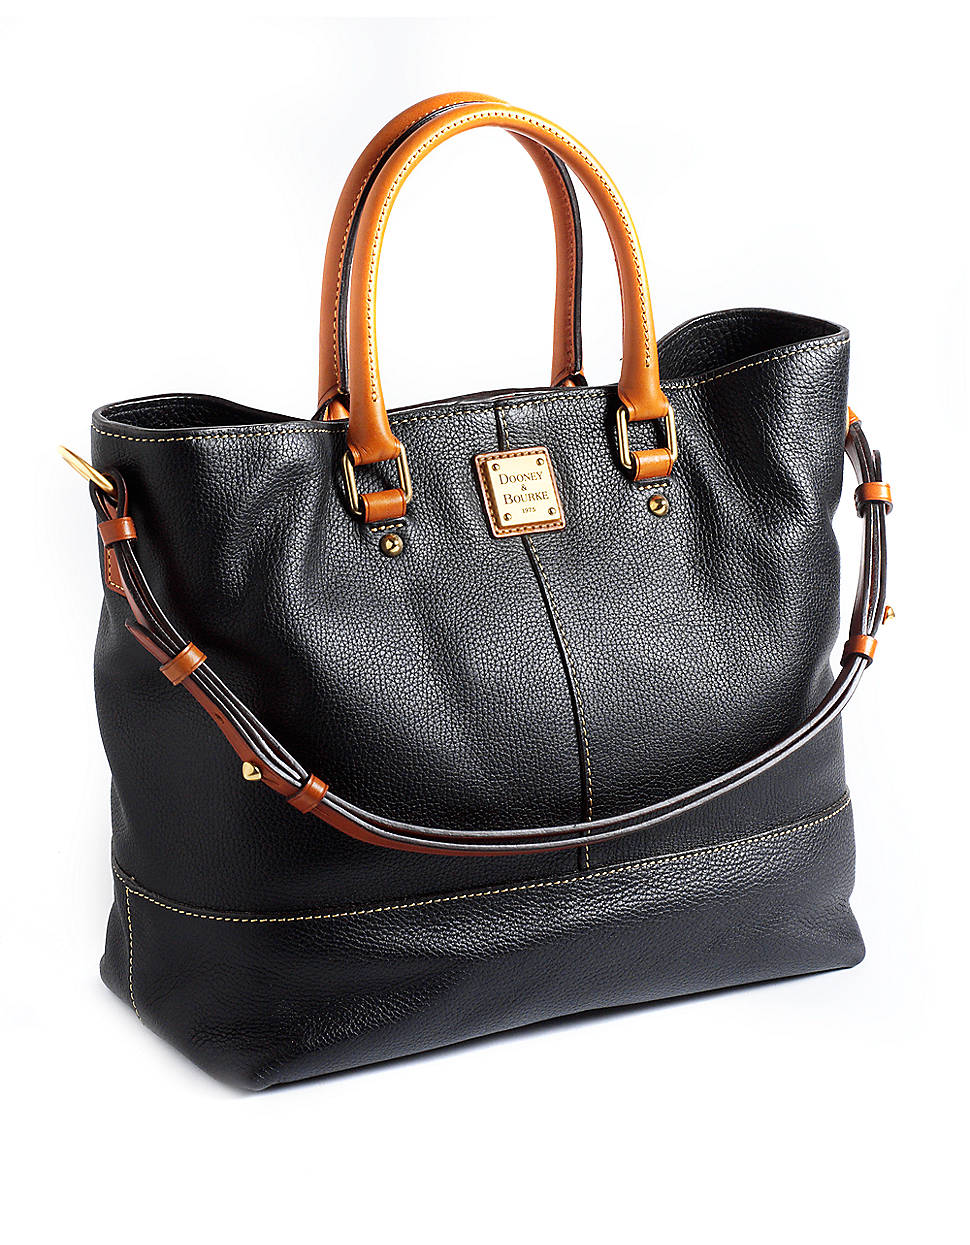 Dooney & Bourke Leather City Collection Barlow Satchel in Charcoal